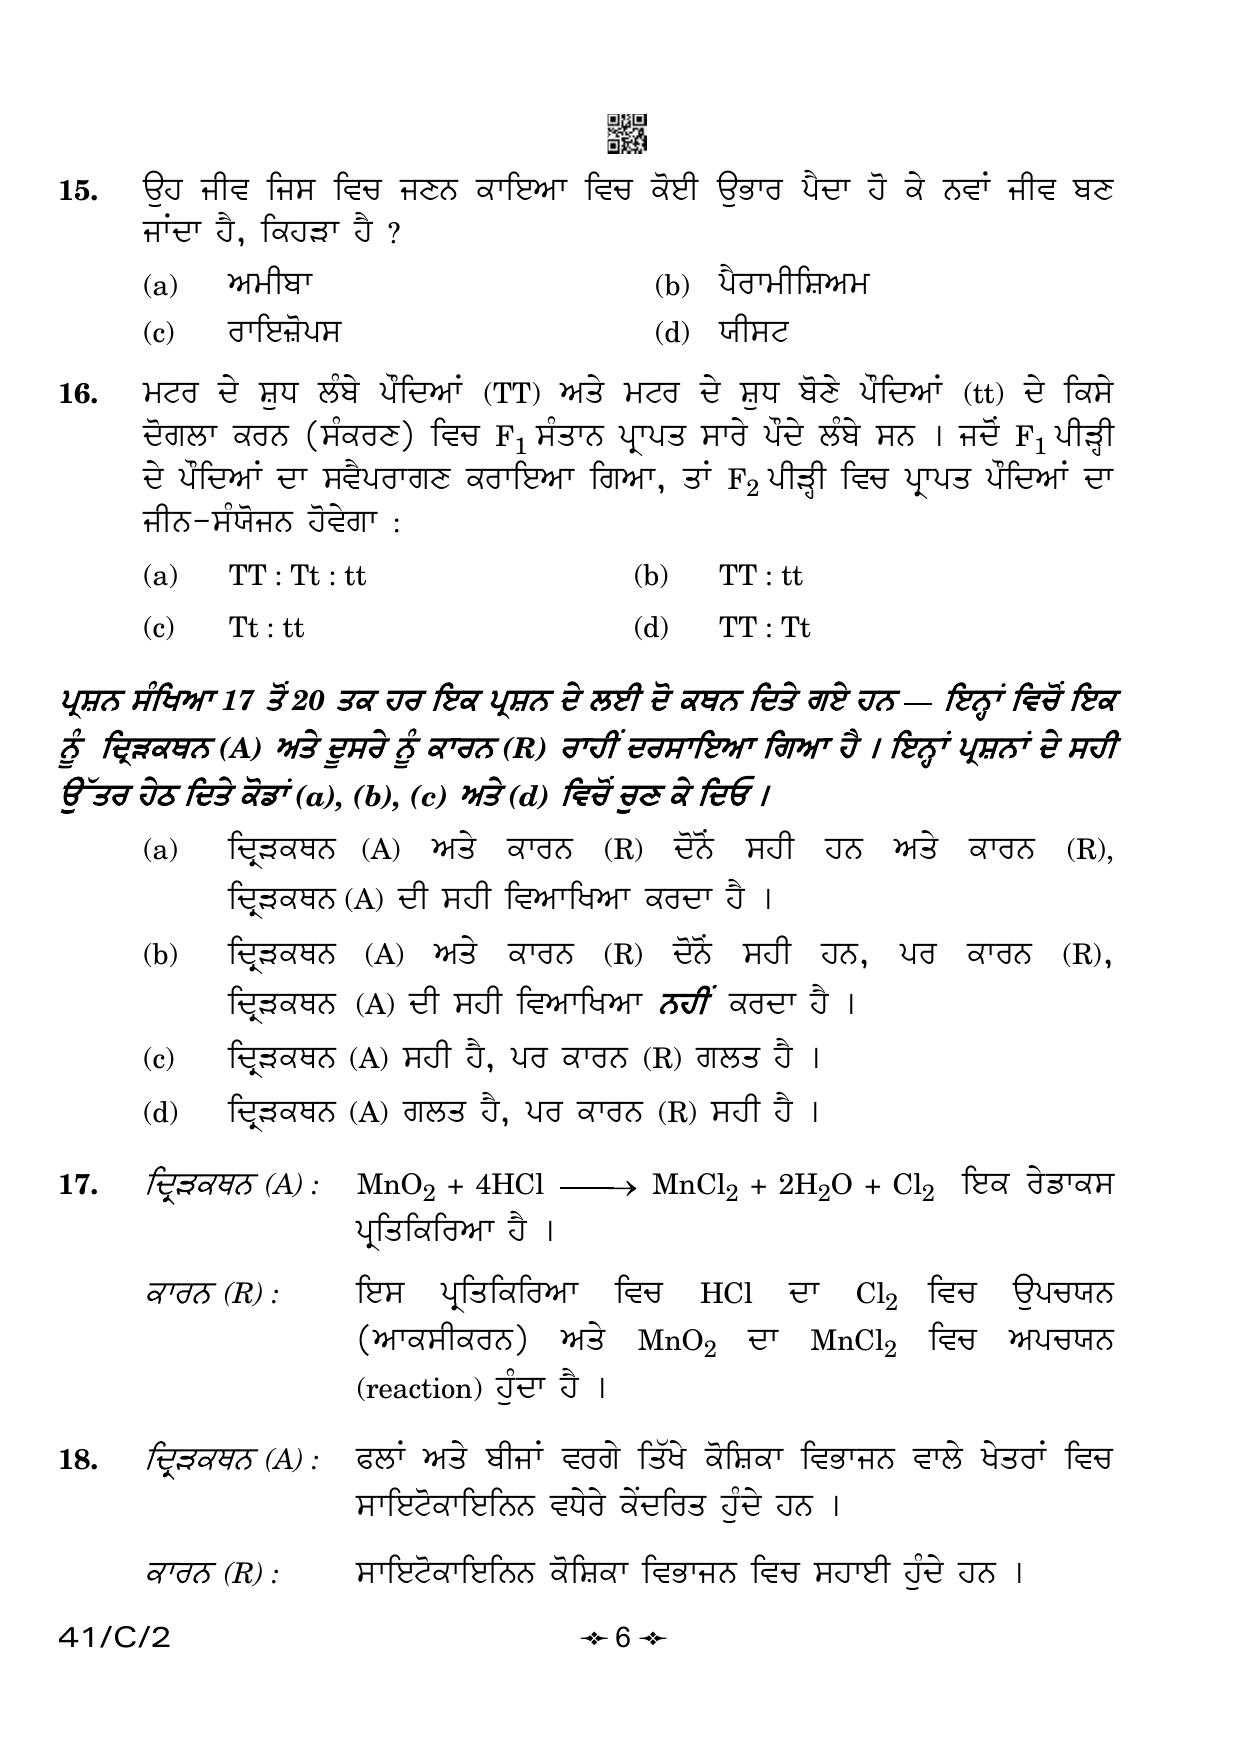 CBSE Class 10 41-2 Science Punjabi 2023 (Compartment) Question Paper - Page 6